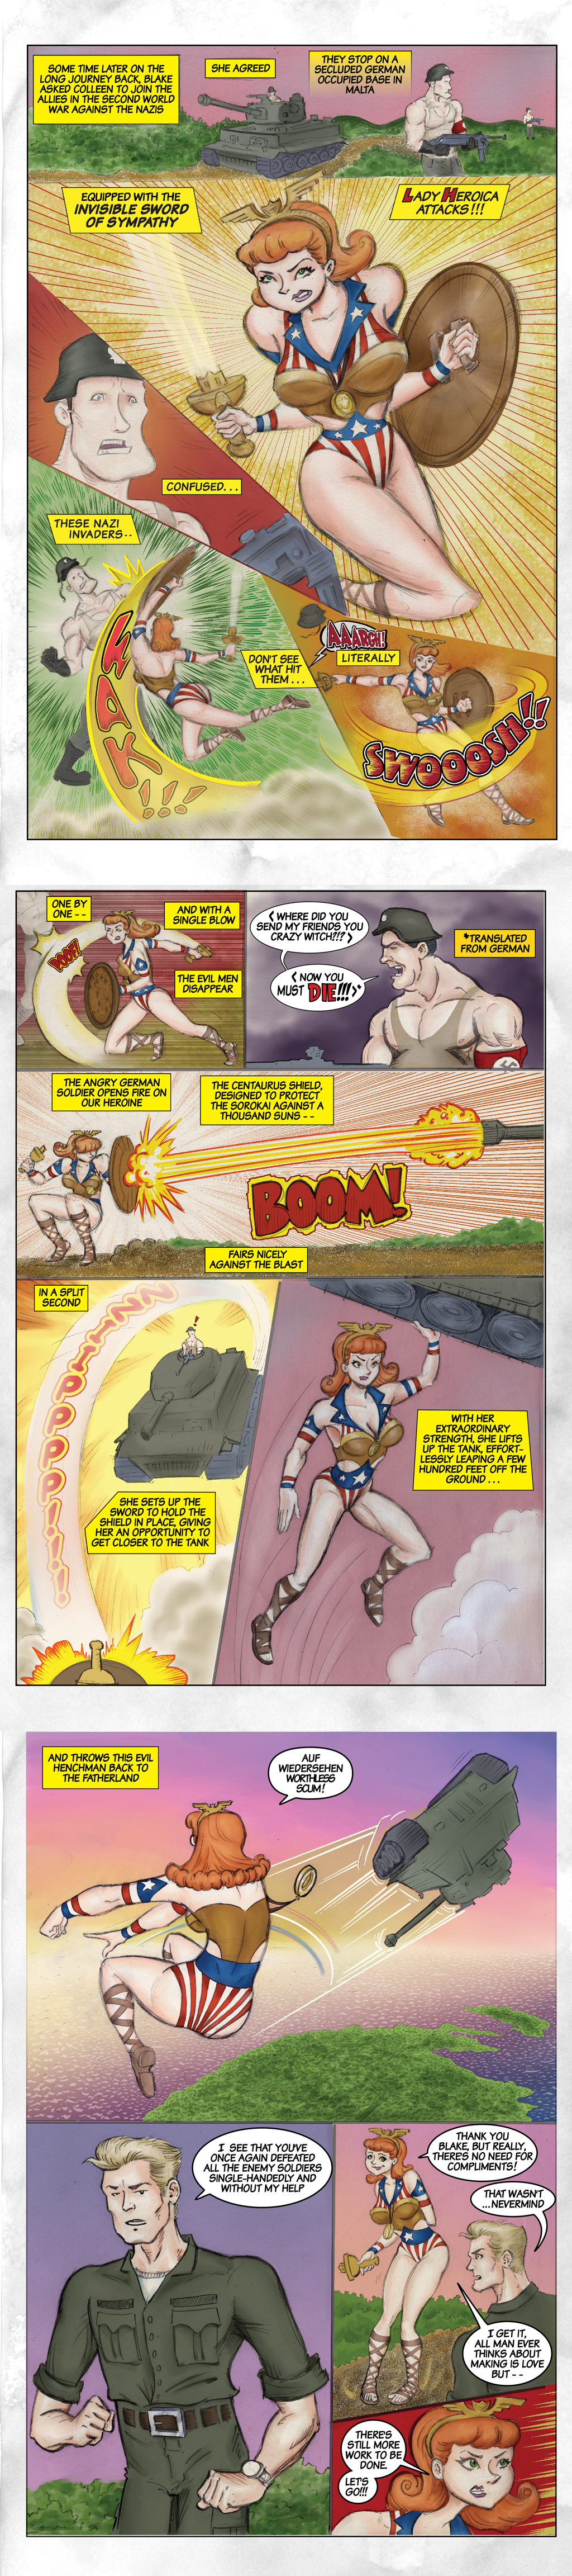 RCN2 LADY HEROICA 3 PAGE PREVIEW